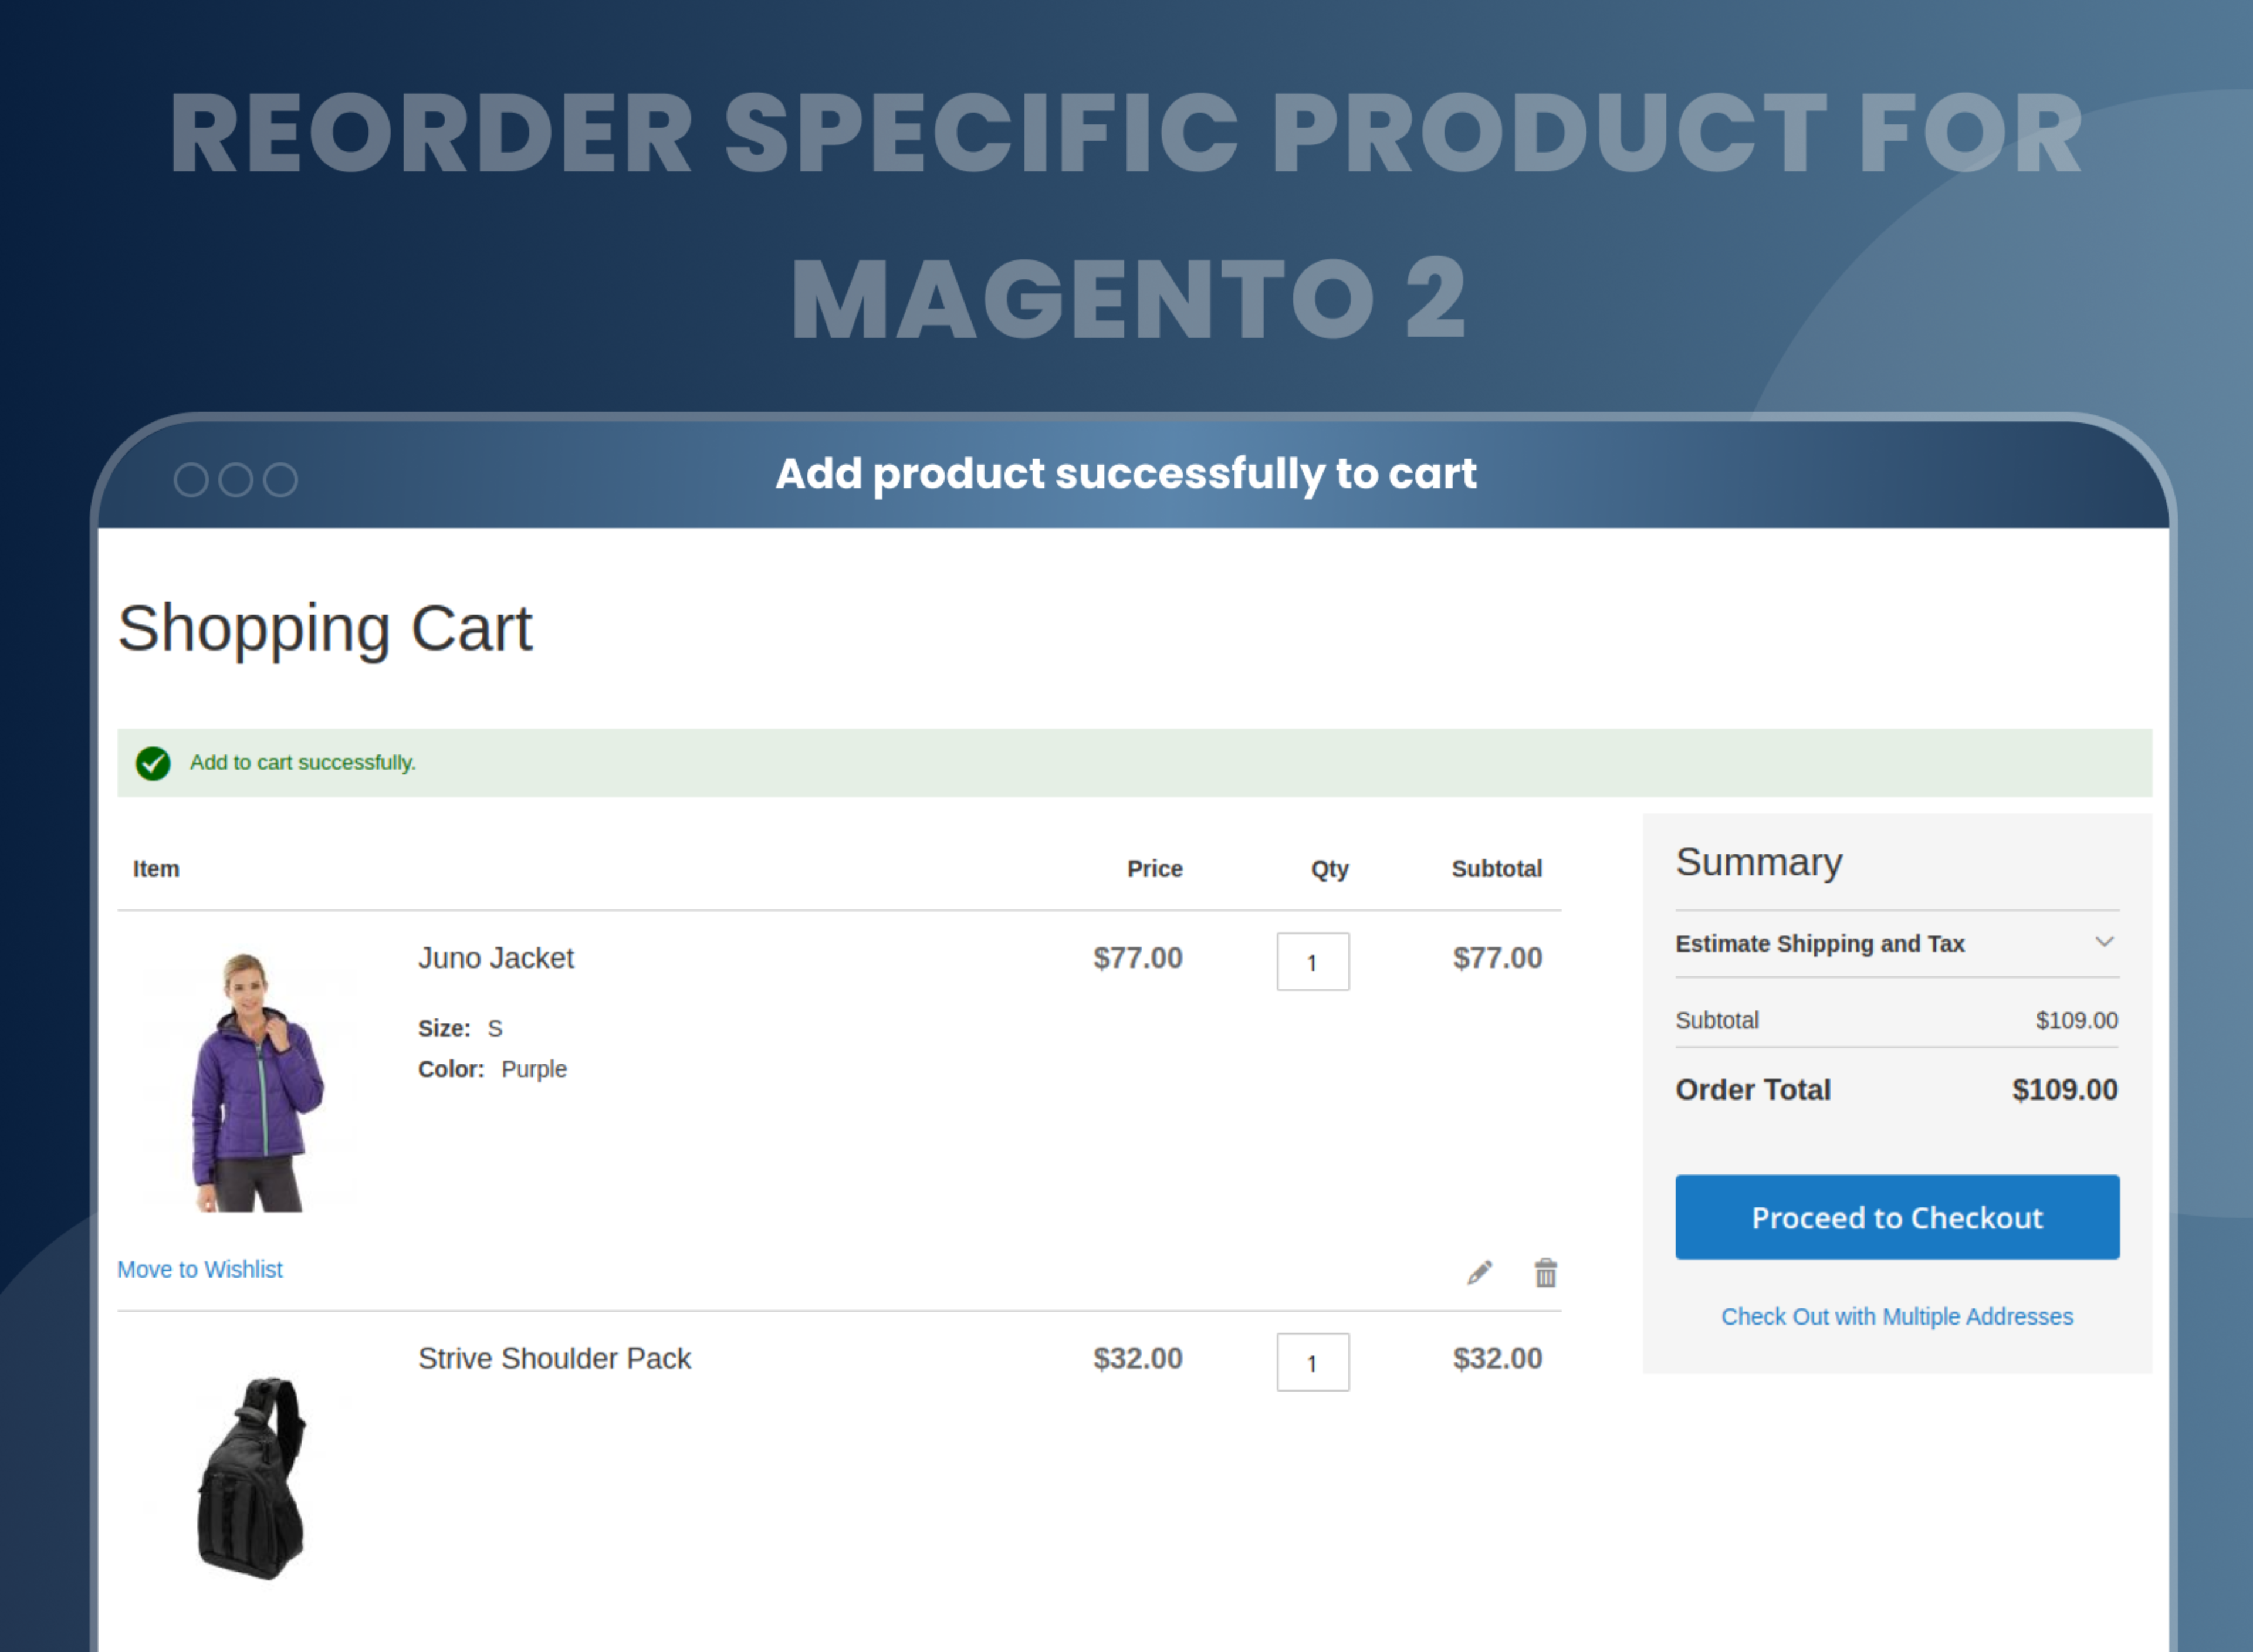 Add product successfully to cart